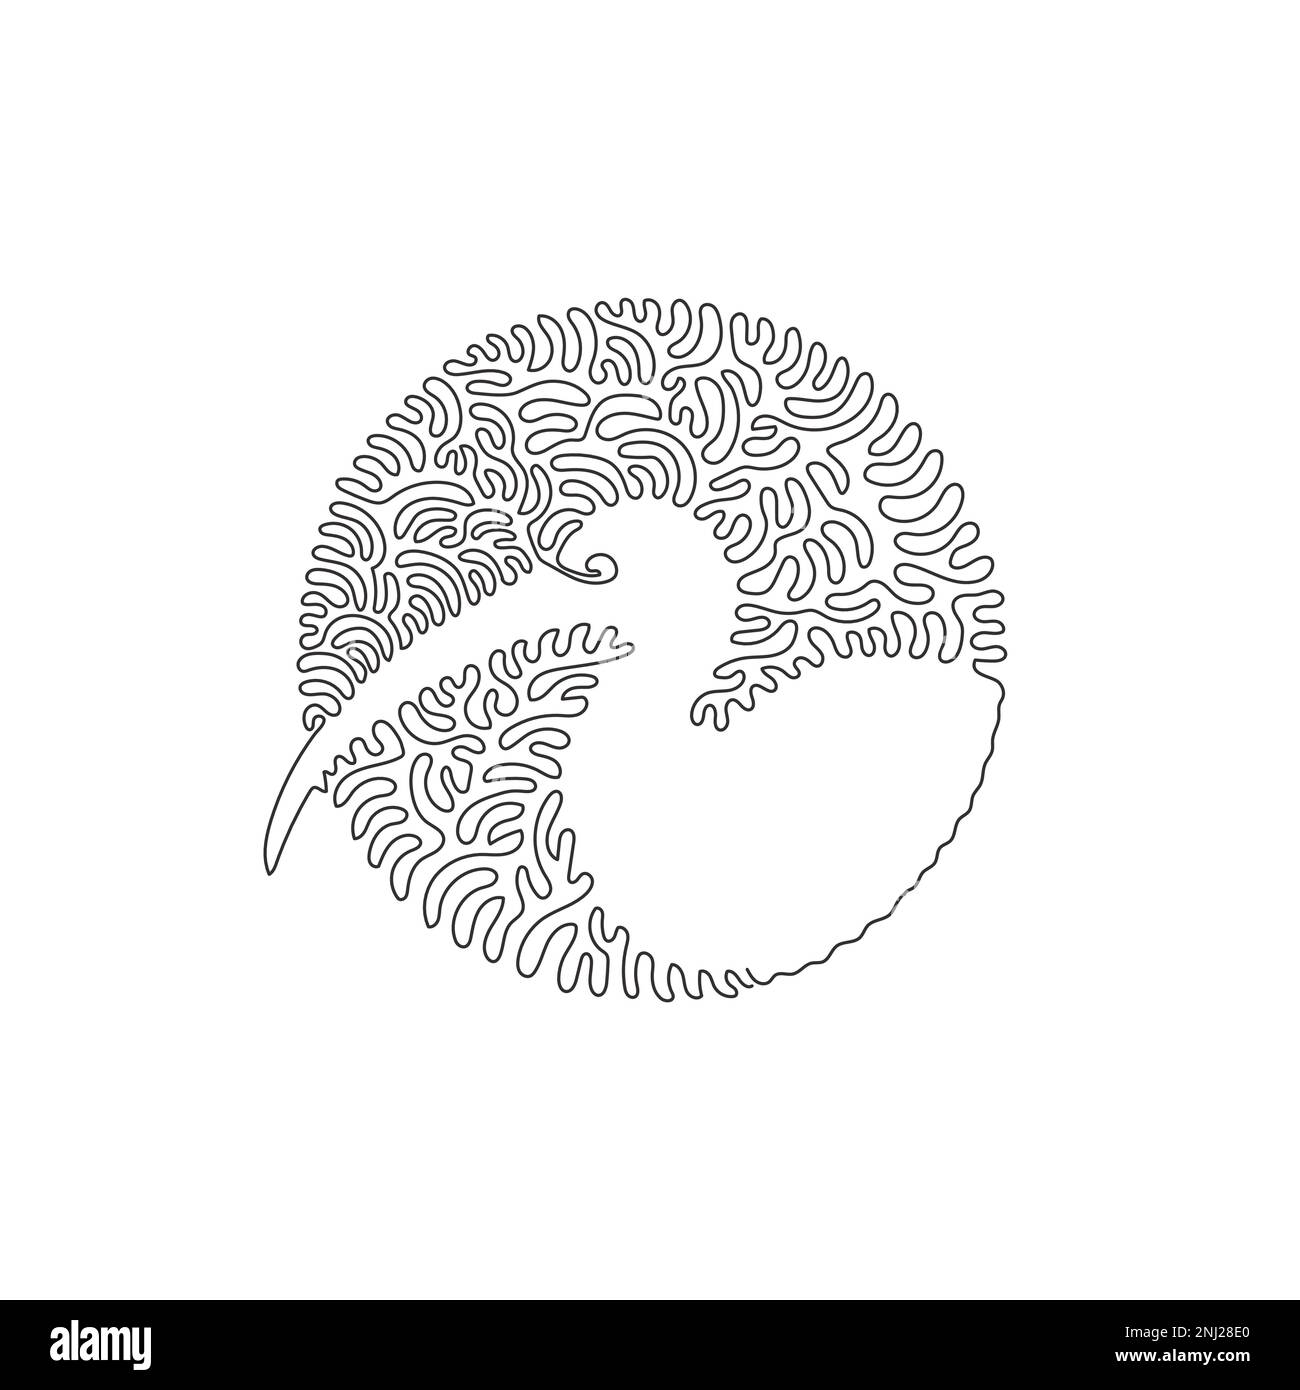 Continuous one curve line drawing of funny ibises abstract art in circle. Single line editable stroke vector illustration of long curved bills Stock Vector